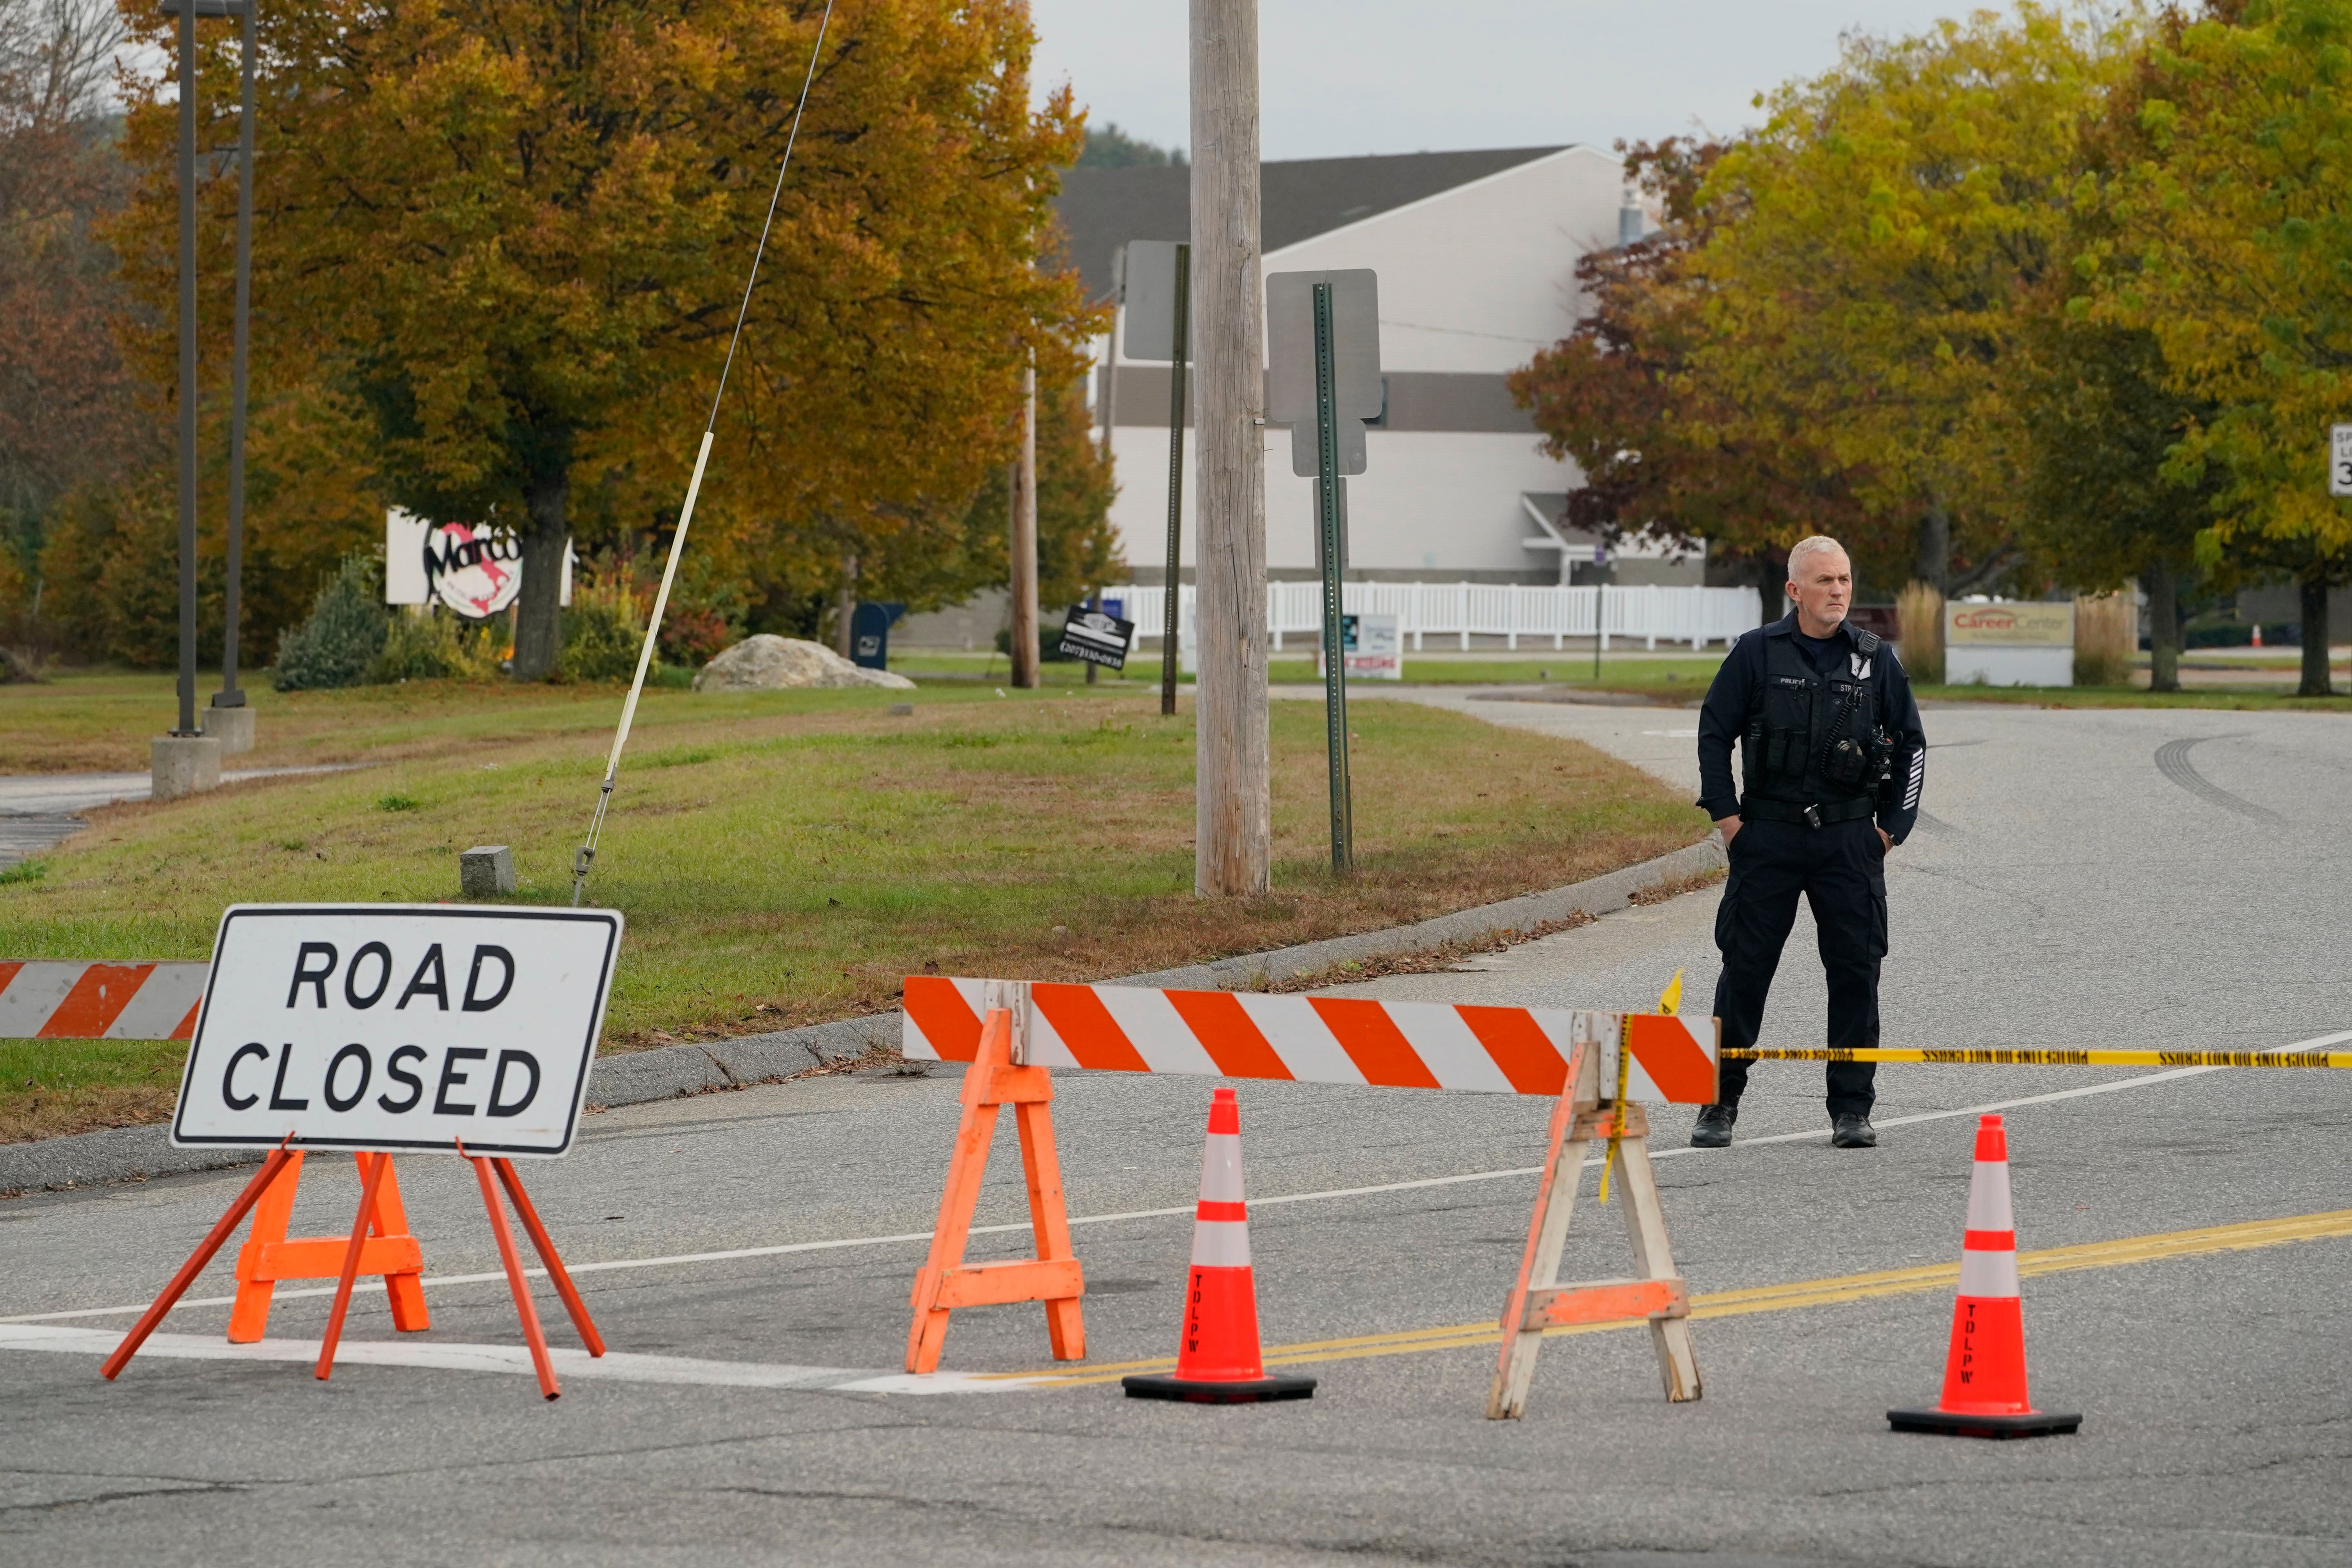 A police officer stands at a road closure near the bowling alley